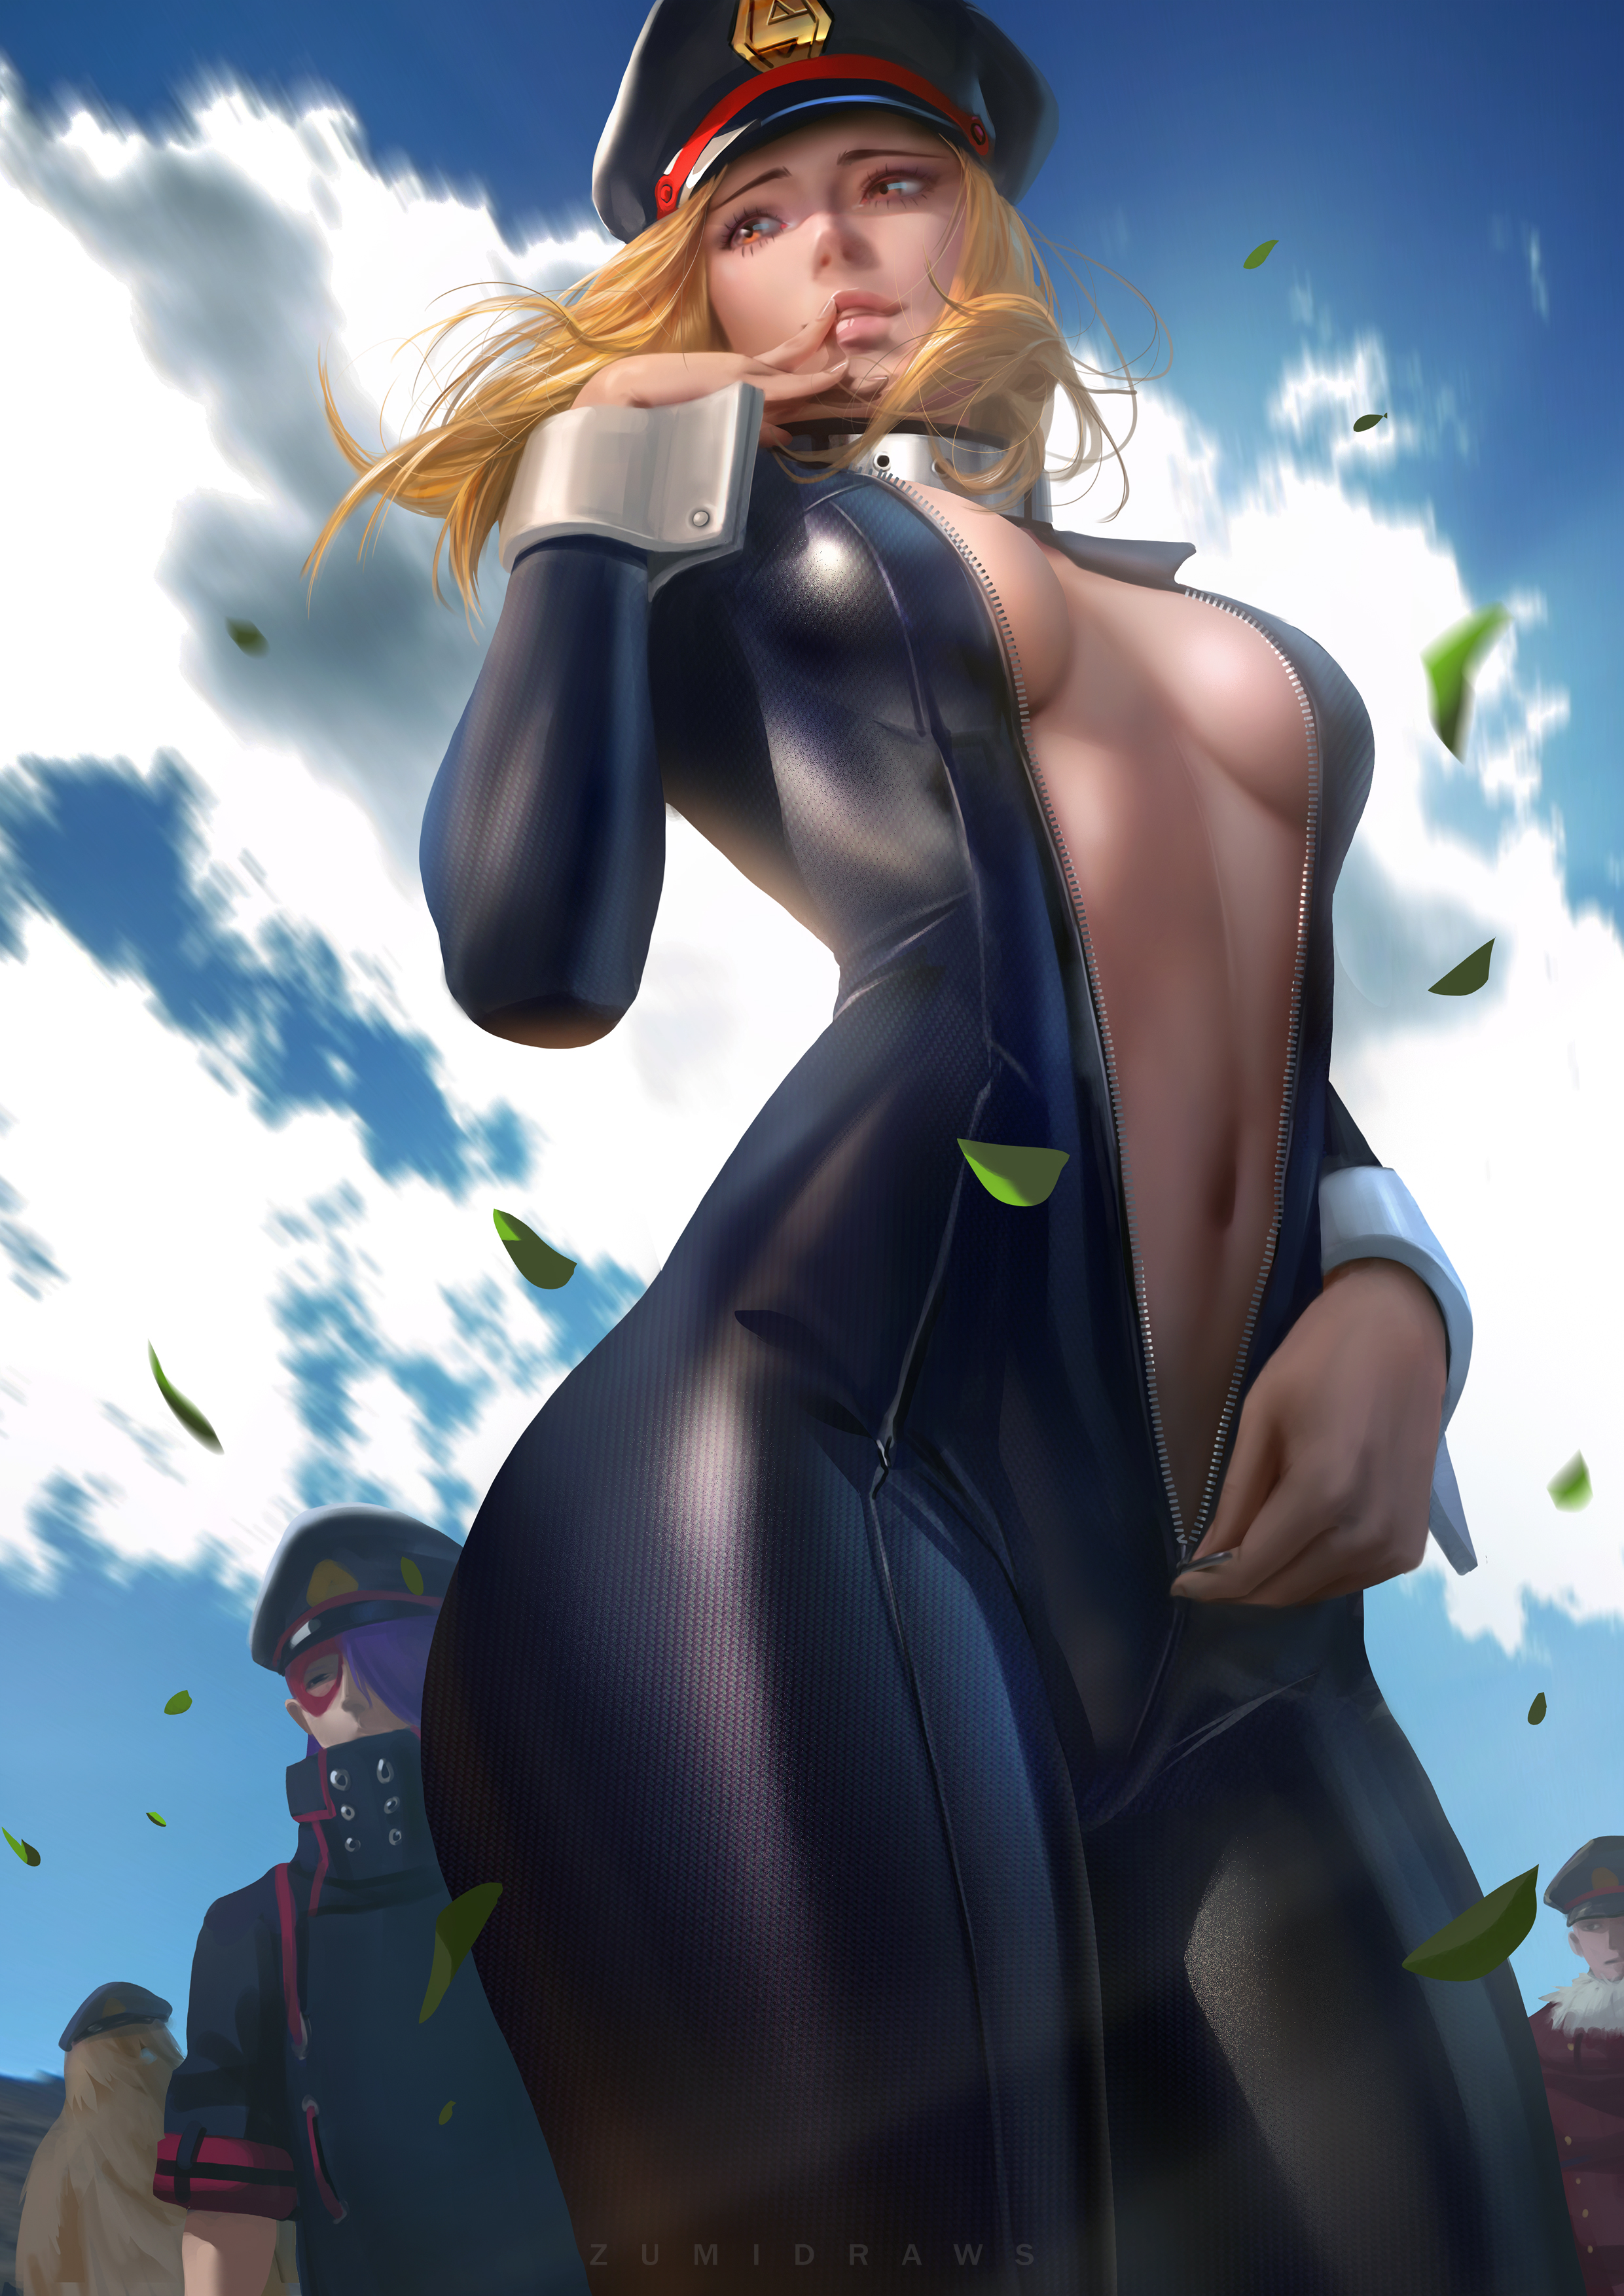 Anime 2481x3508 Utsushimi Camie Boku no Hero Academia anime anime girls blonde belly artwork drawing digital art fan art Zumi ecchi cleavage no bra zipper open clothes low-angle portrait display looking away clouds thick thigh tight clothing bodysuit catsuit berets